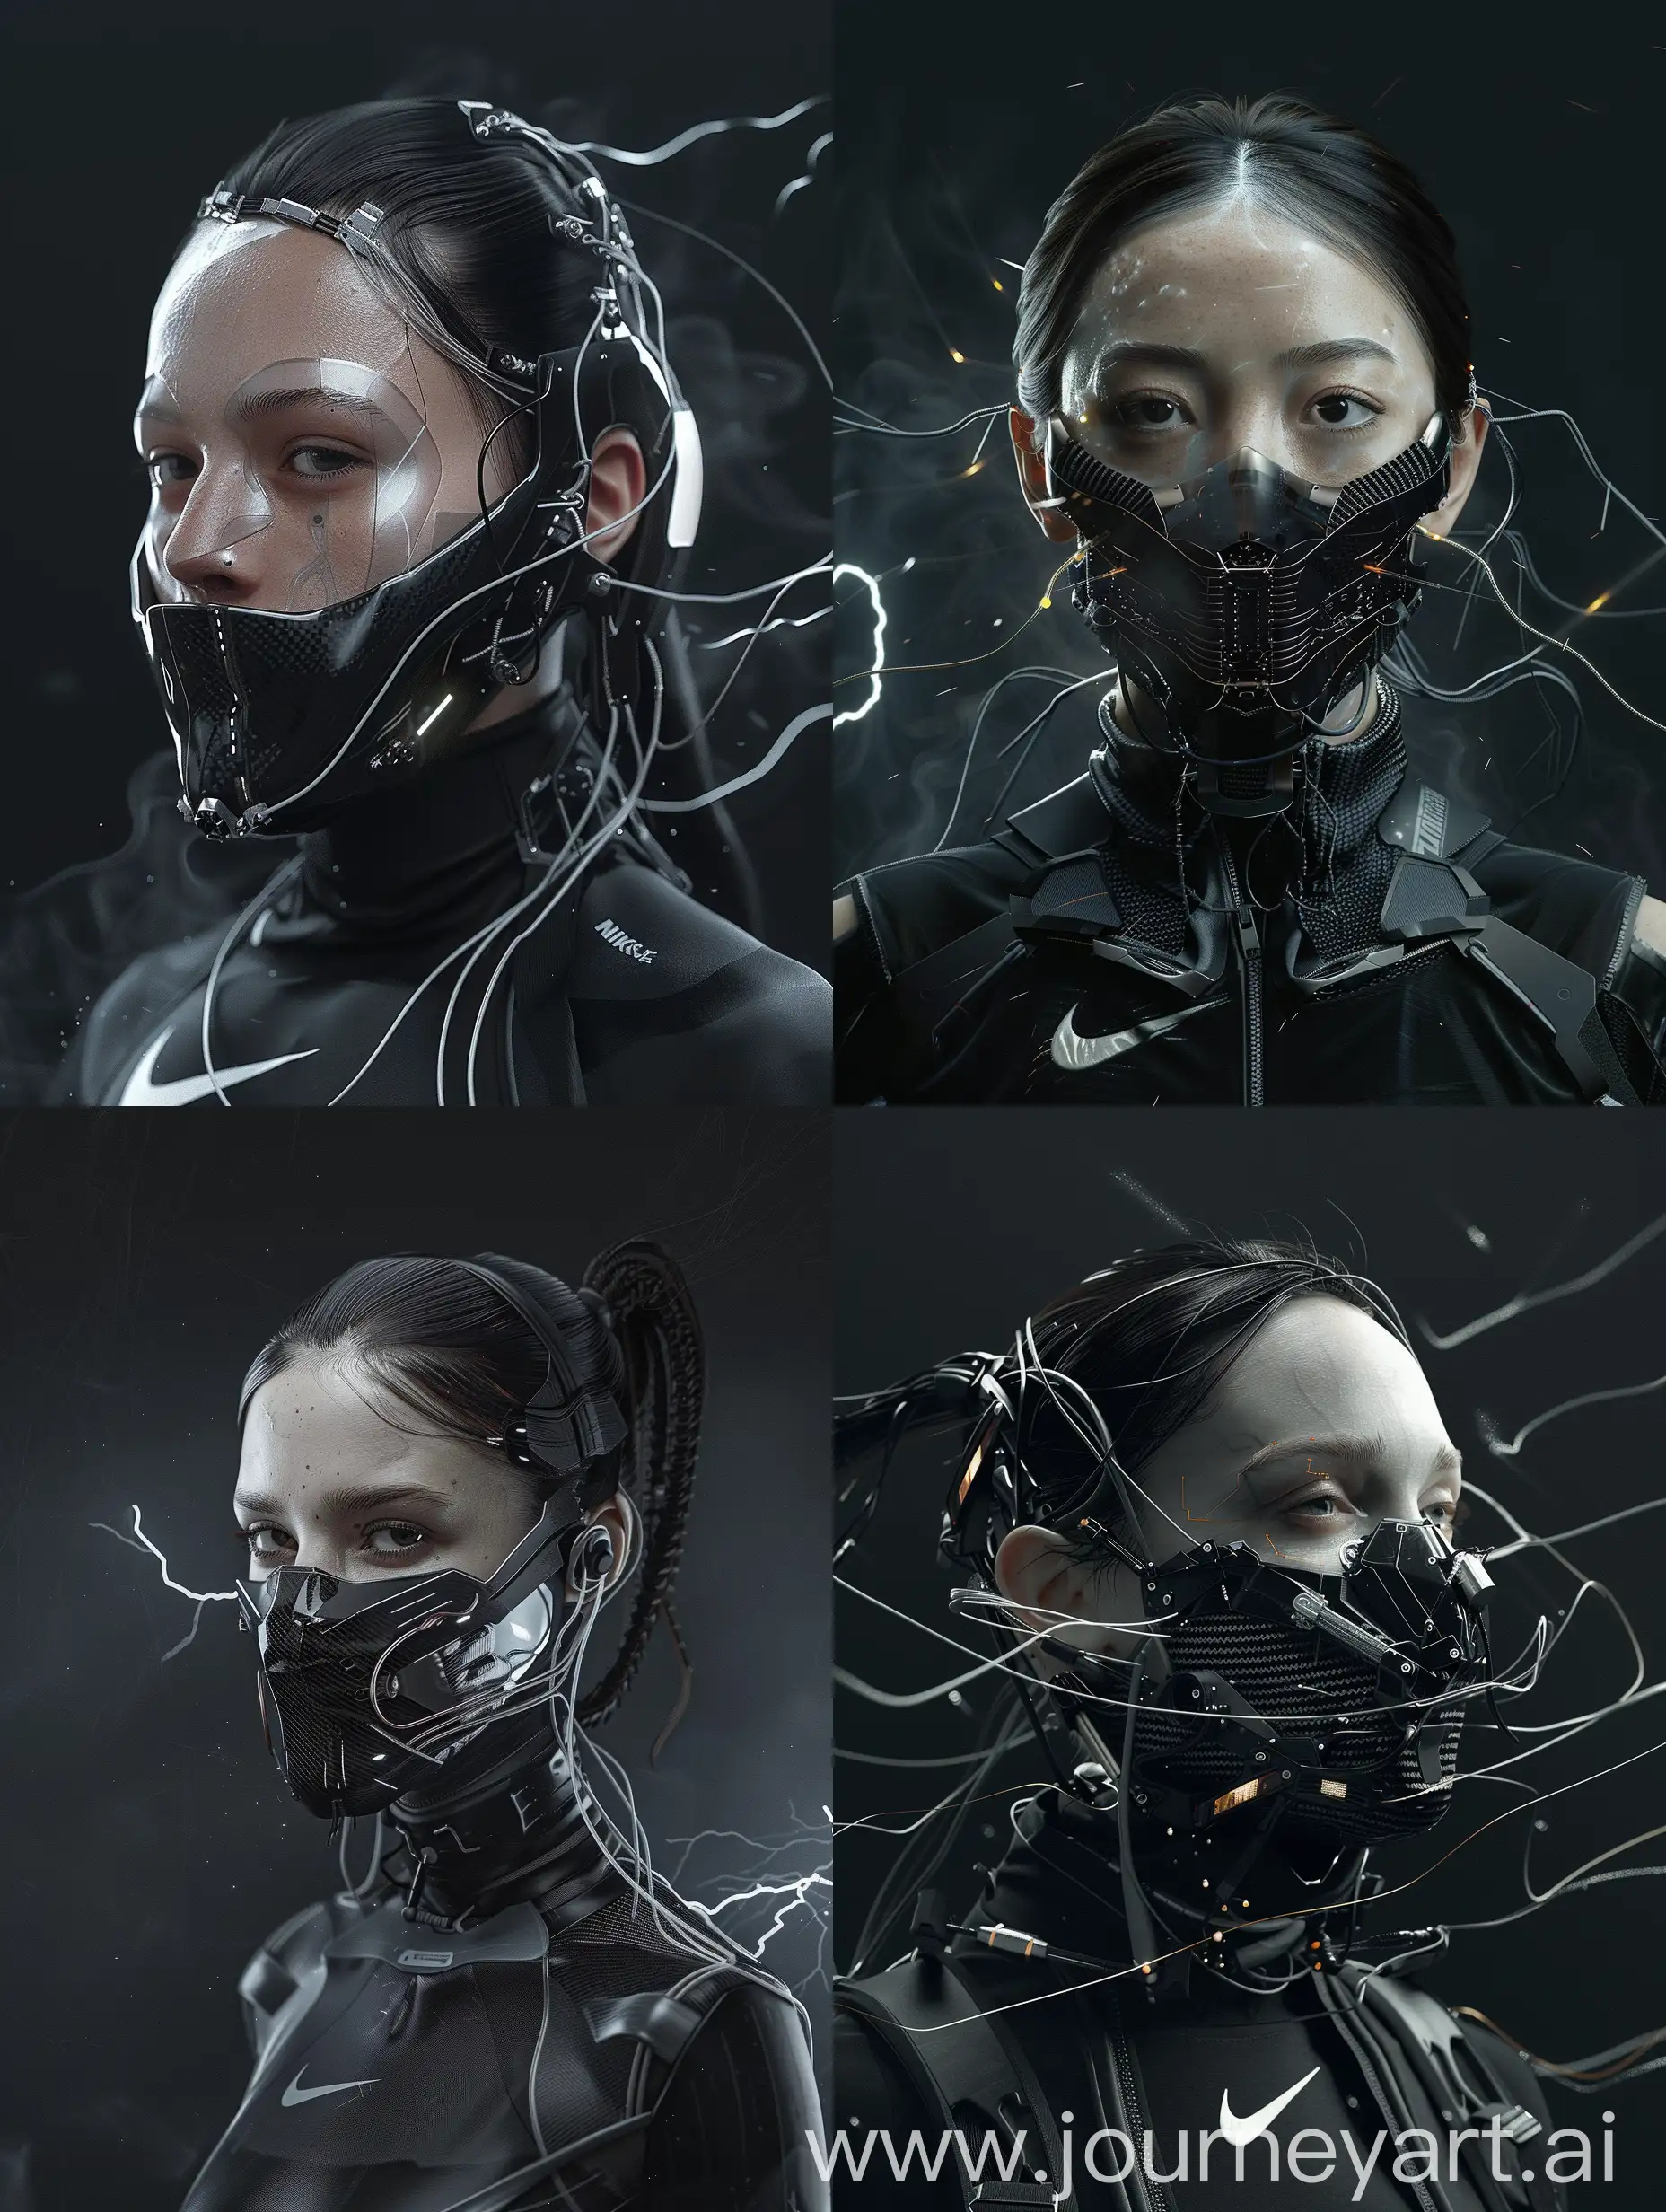 Against a sleek black backdrop, behold a mesmerizing character adorned with a cybernetic mouth-covering mask. It seamlessly blends cutting-edge technology with intricate details, boasting carbon fiber textures, sleek aluminum accents, and wires. Symbolizing the delicate balance between humanity and machine, her appearance embodies the essence of a futuristic cyberpunk aesthetic, enhanced with Nike-inspired add-ons. With dynamic movements reminiscent of action film sequences, cinematic haze, and energy that crackles like lightning, her presence captivates with its irresistible allure